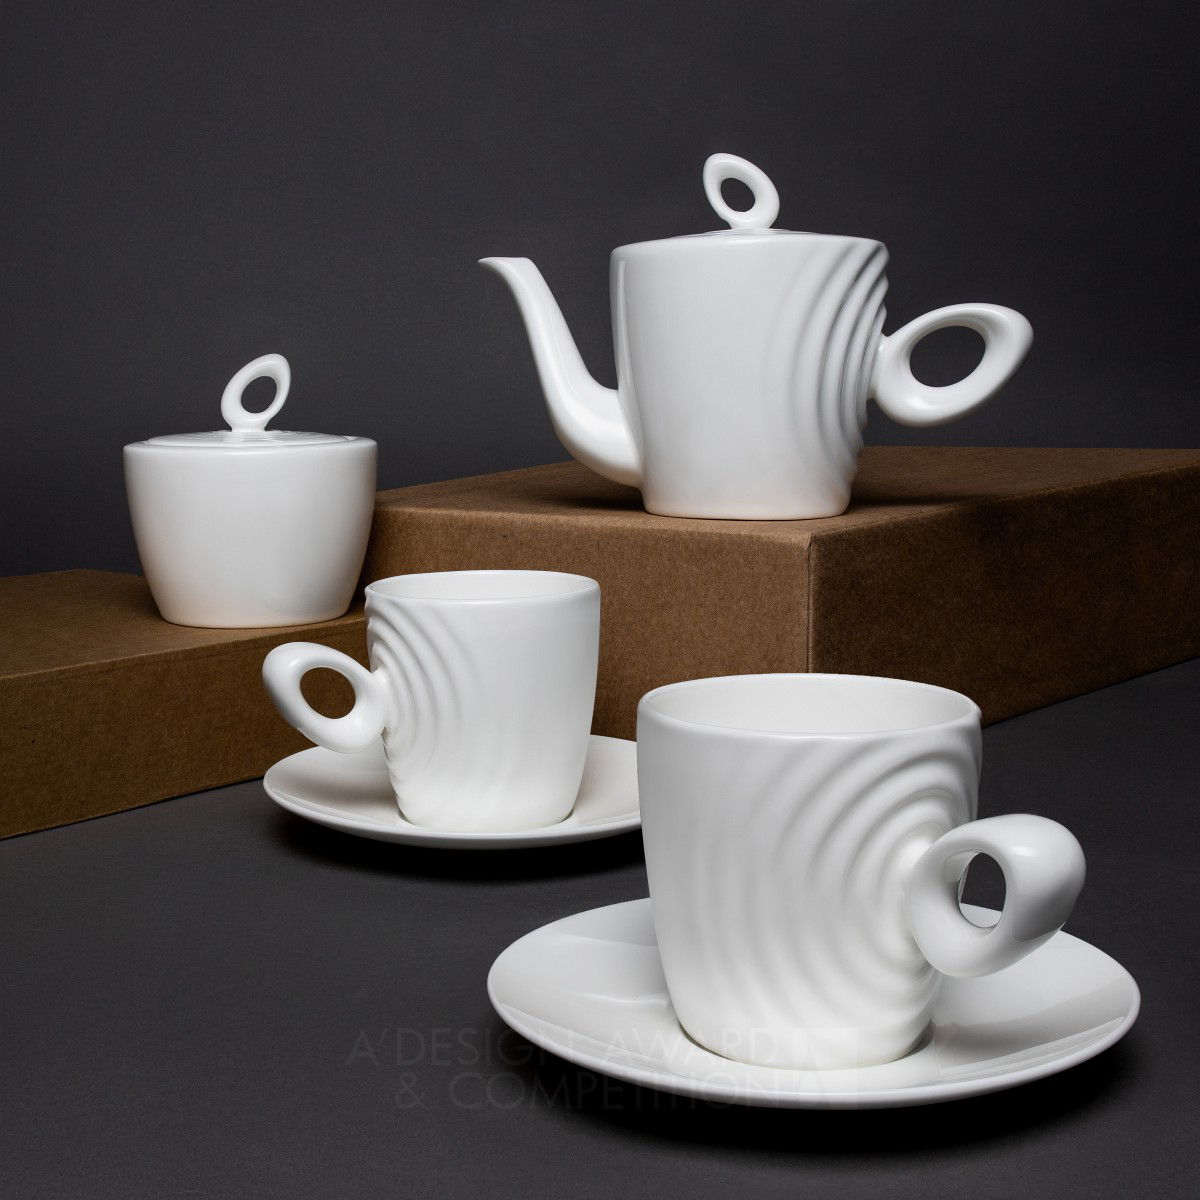 Attimo: A Tea Set That Captures the Essence of Time